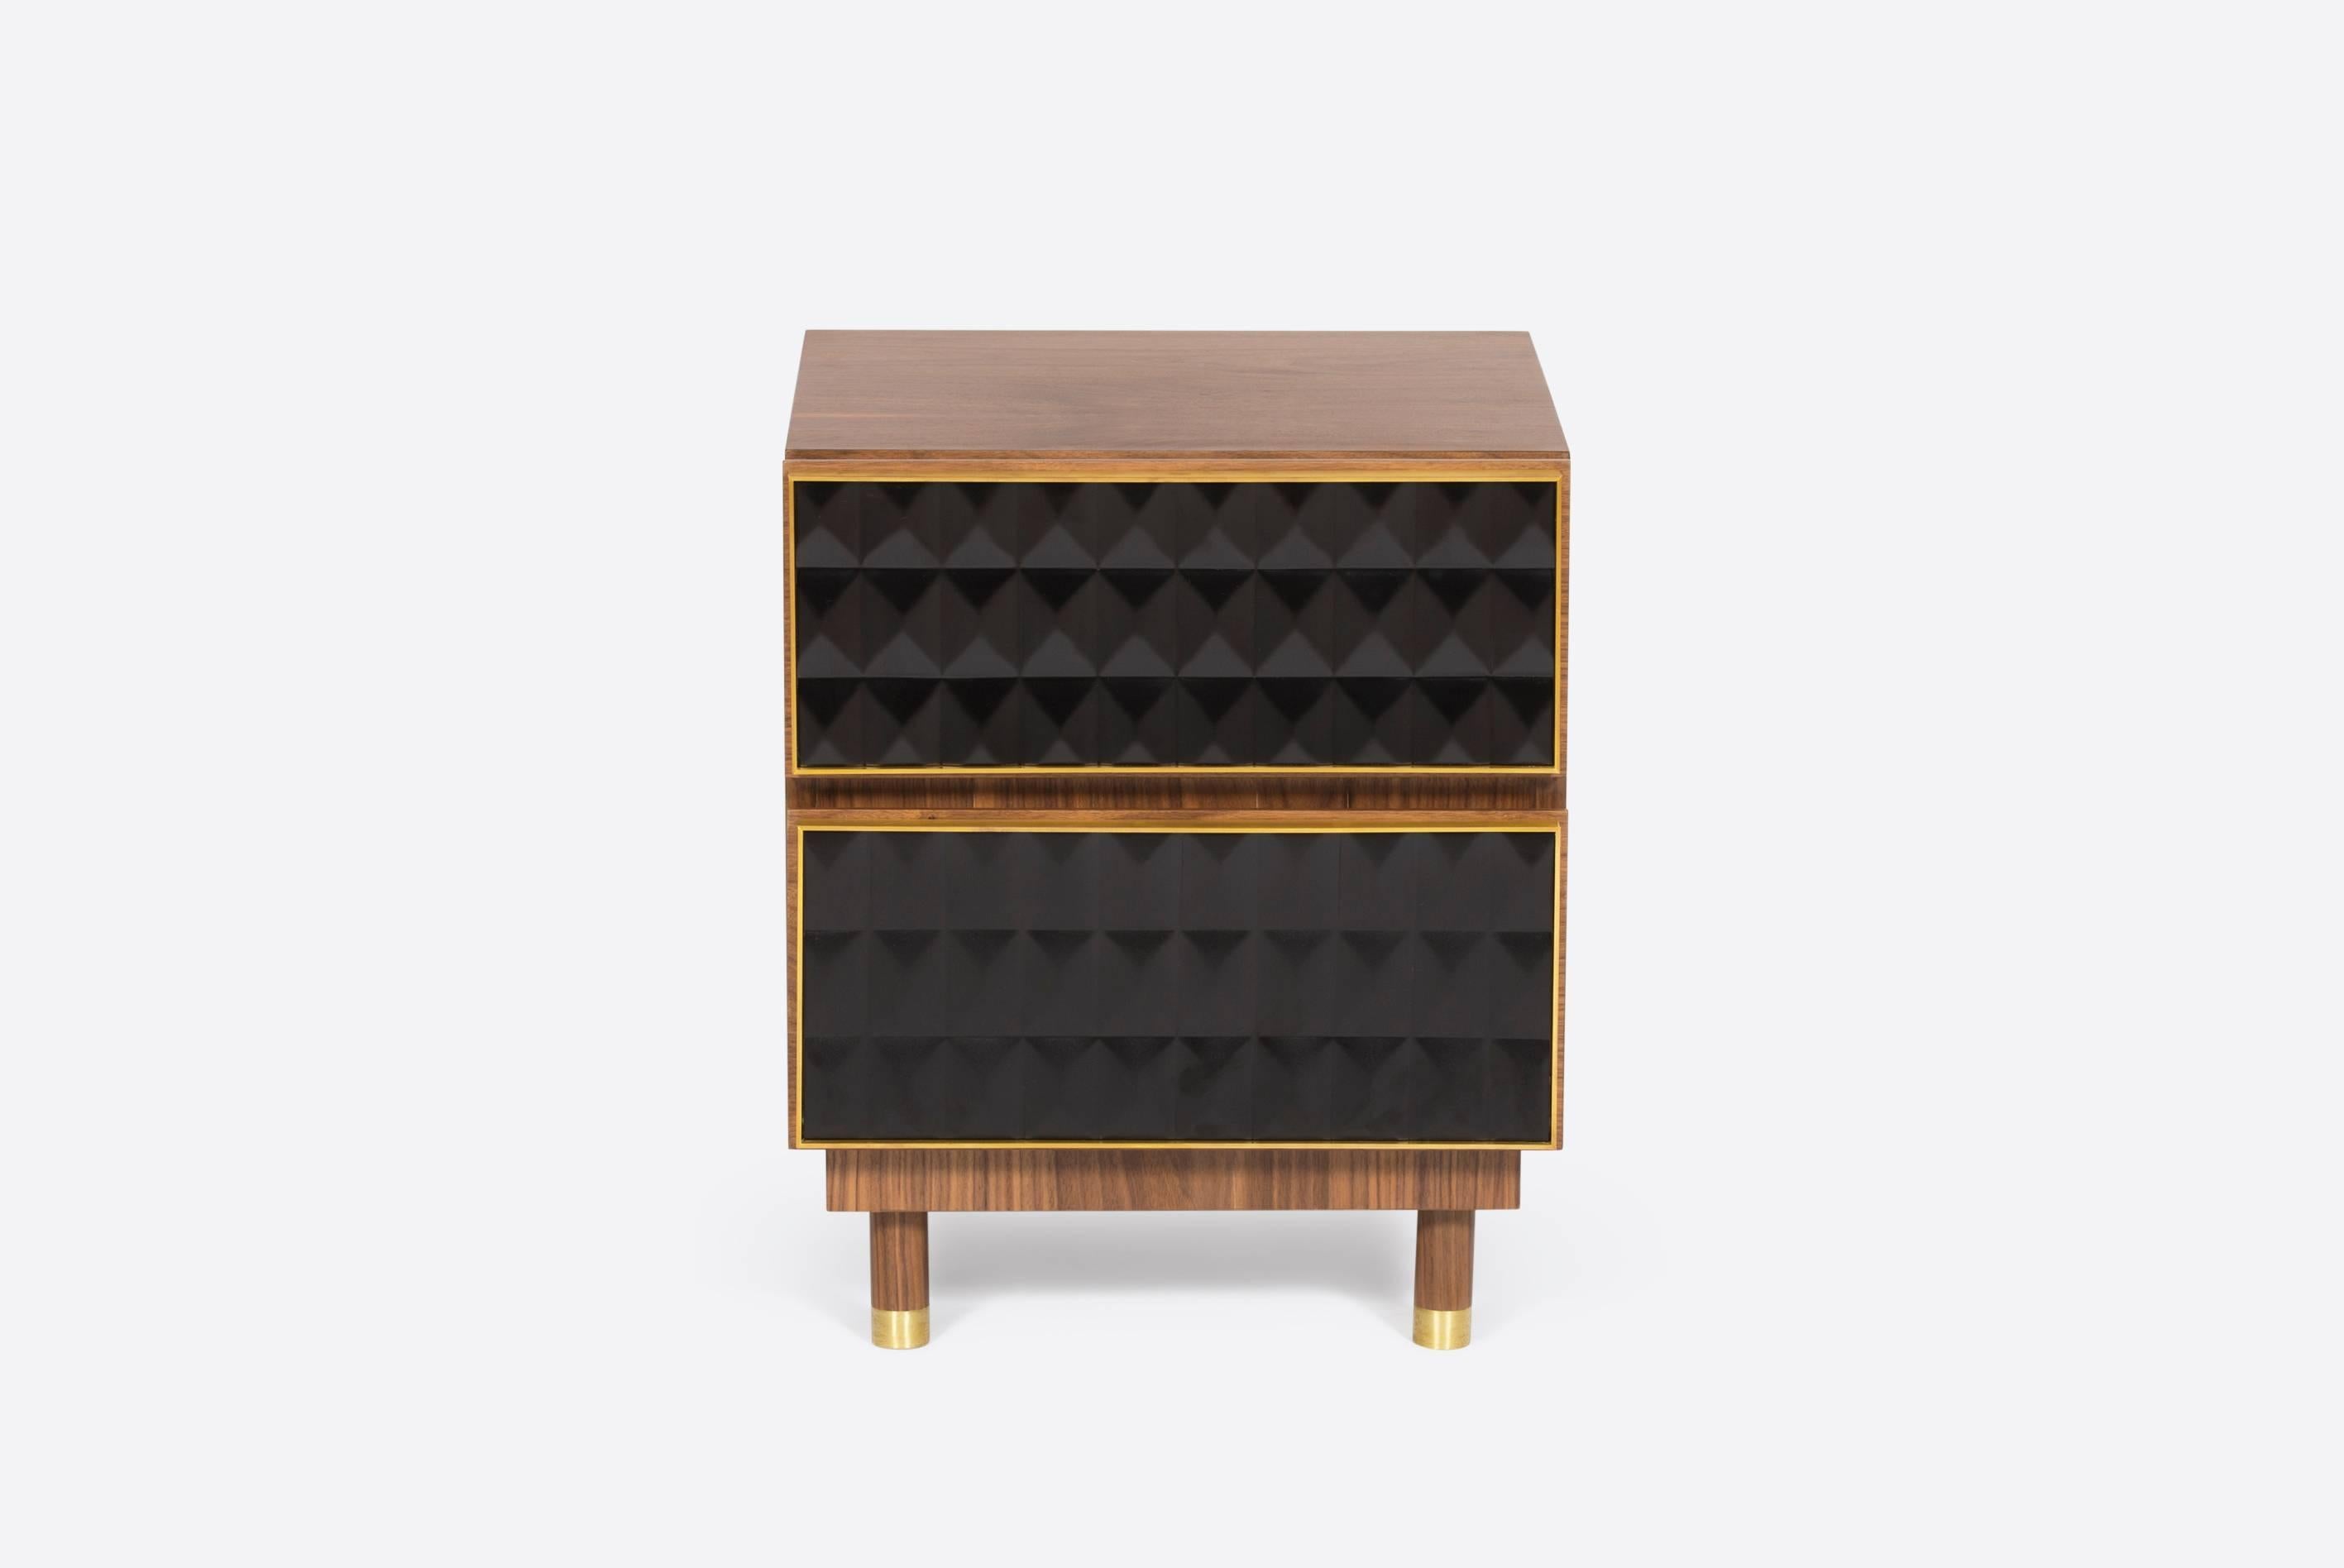 This nightstand, made of brass and walnut, inspired in the mix of materials used in the 1950s architecture, from doors to facades of large buildings. The use of clean lines, geometric figures and characteristic patterns from that era. Created in a